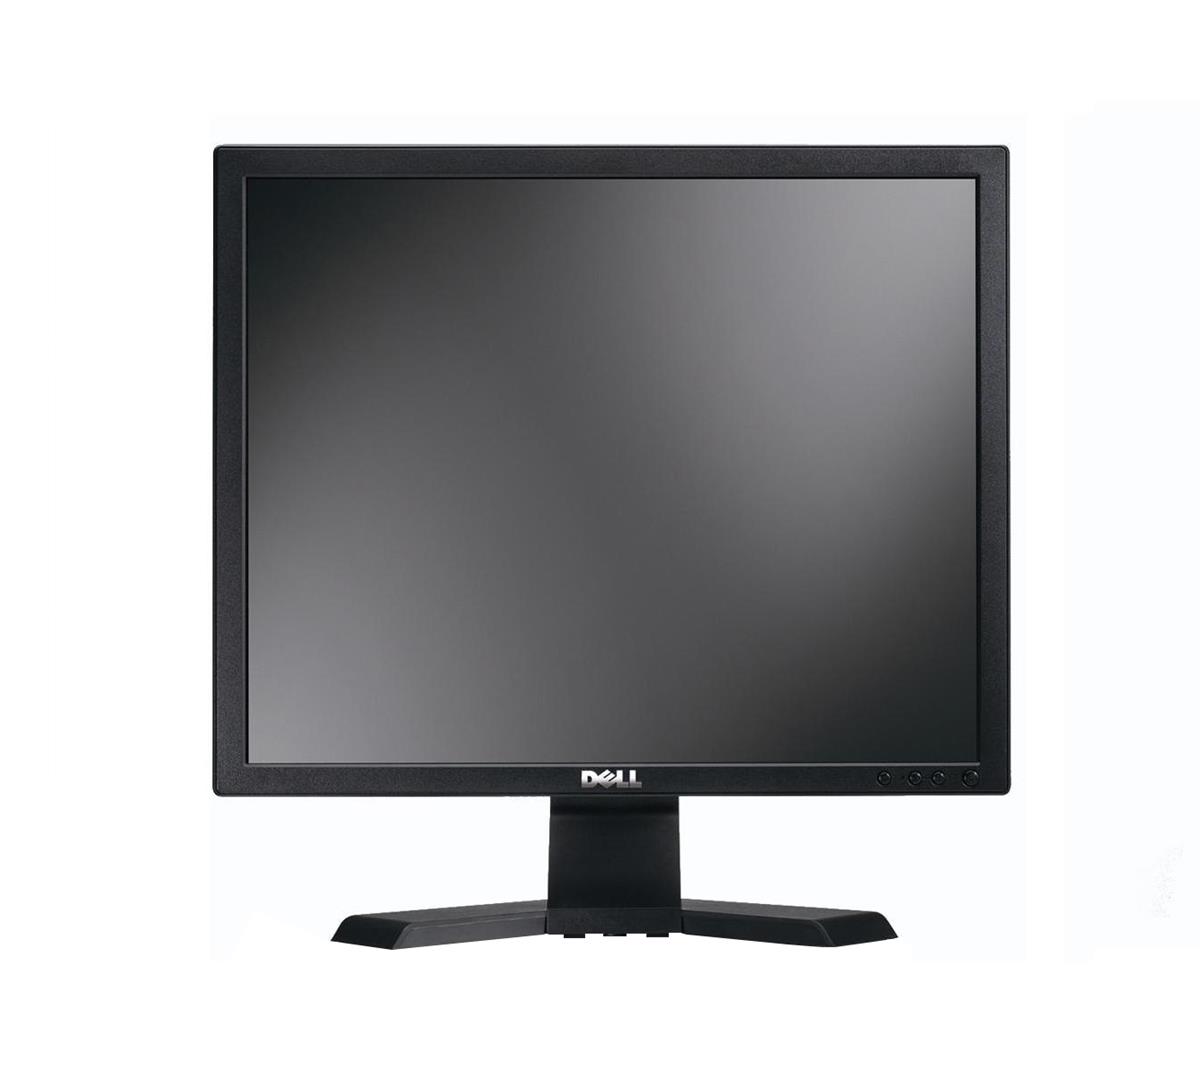 E190SF Dell 19-inch 1280 x 1024 at 60Hz Flat Panel LCD Monitor (Refurbished)